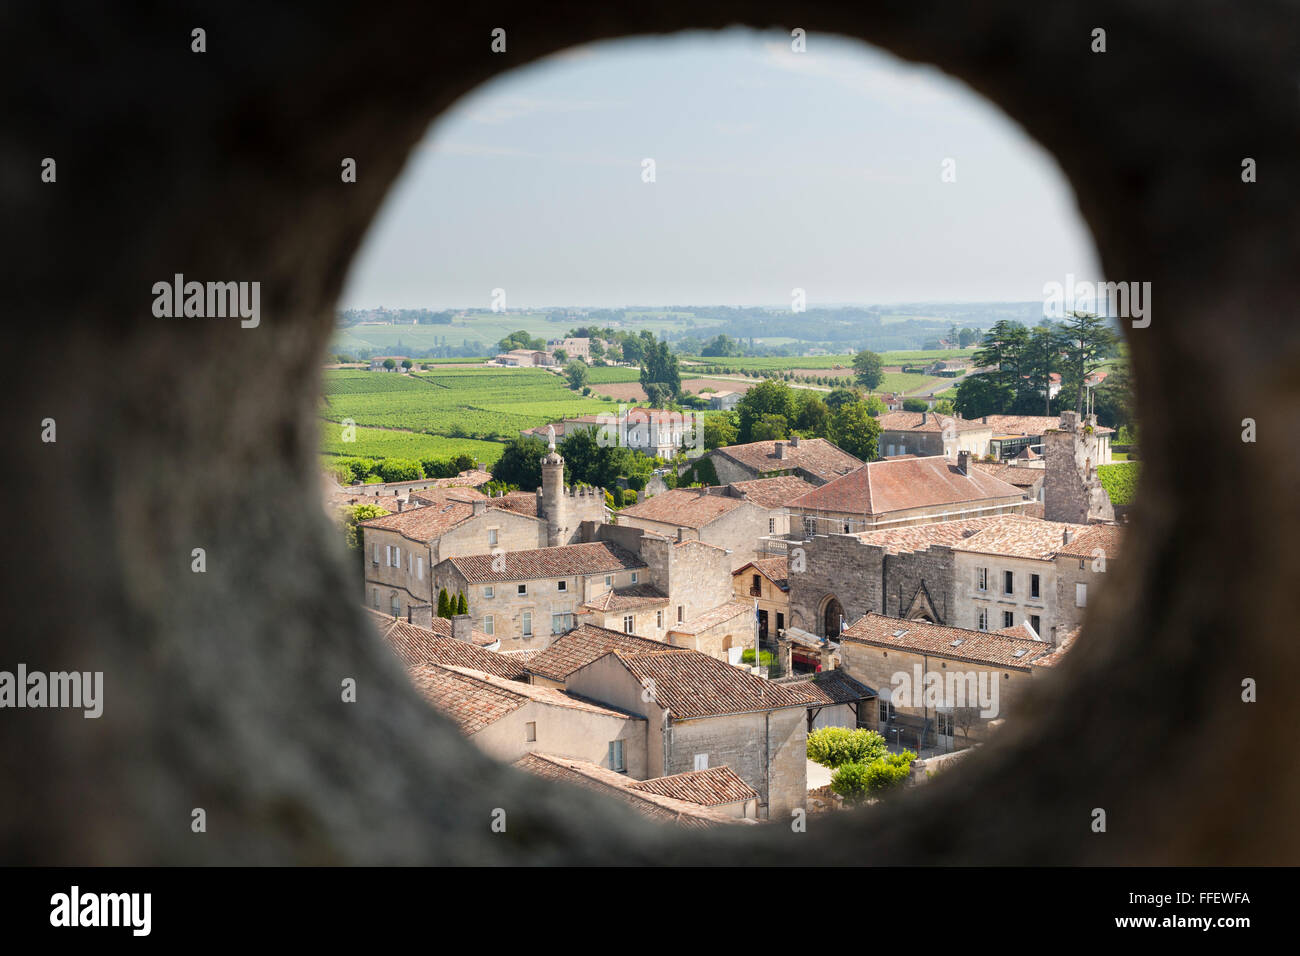 Buildings of Saint-Emilion viewed through hole in bell tower, Saint Emilion, Gironde, Aquitaine, France Stock Photo